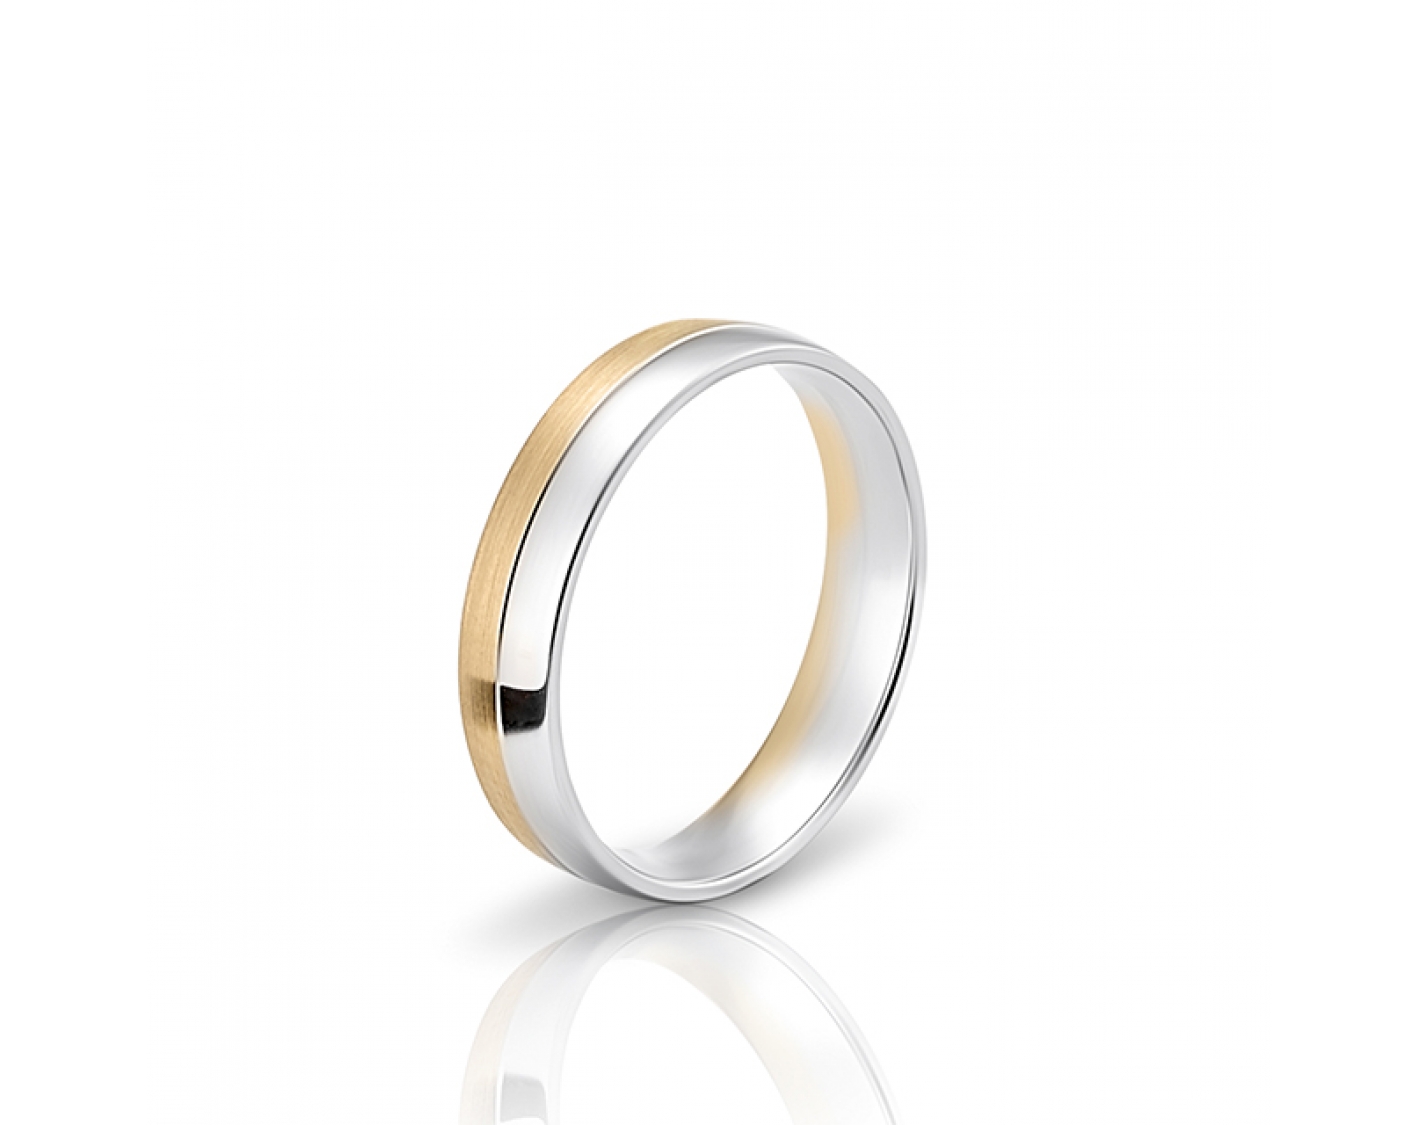 dual-tone 4,5mm two-toned* wedding band